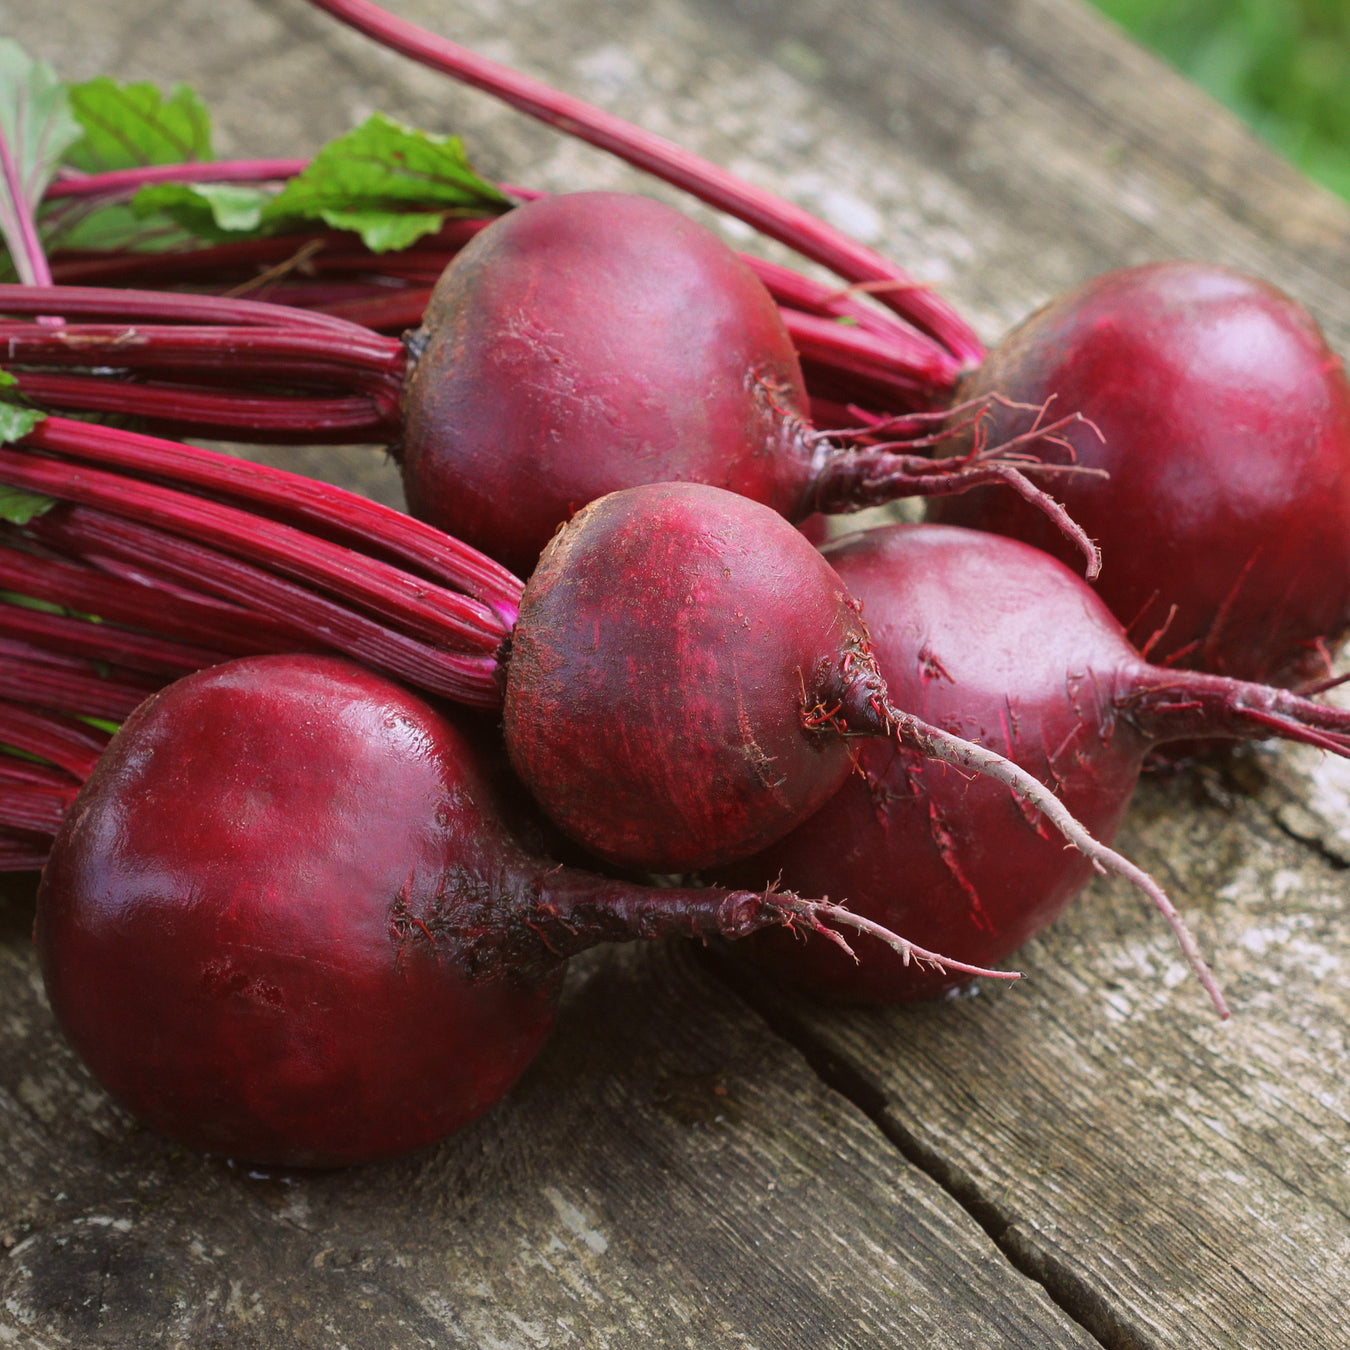 Detroit Dark Red Beets grown from seed and displayed on a wooden background outdoors.